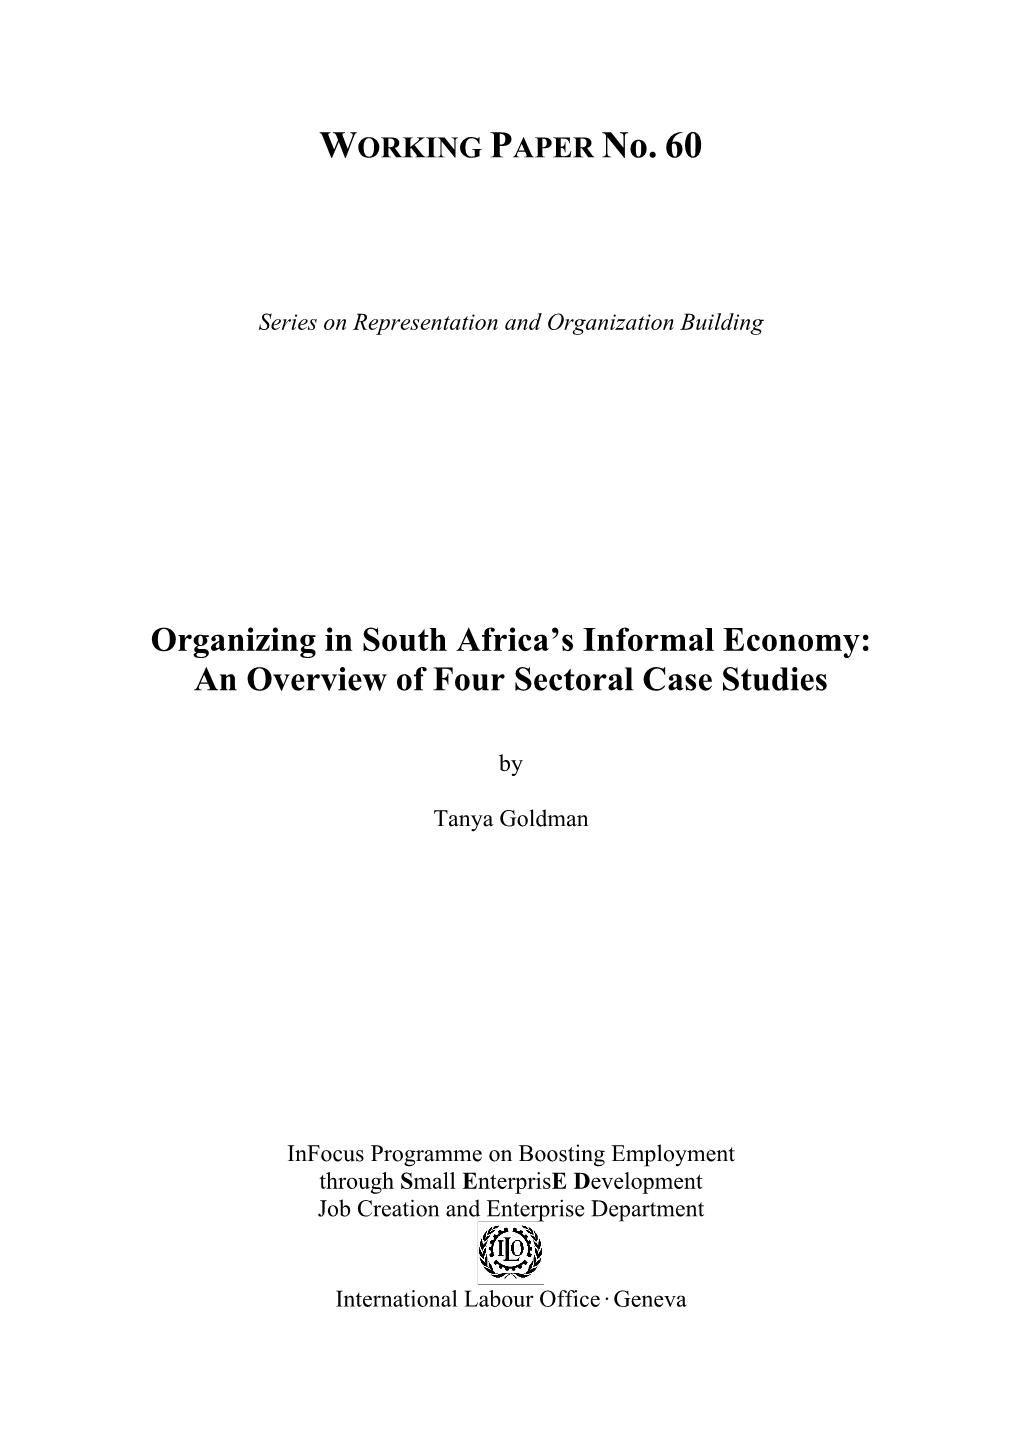 Organizing in South Africa's Informal Economy